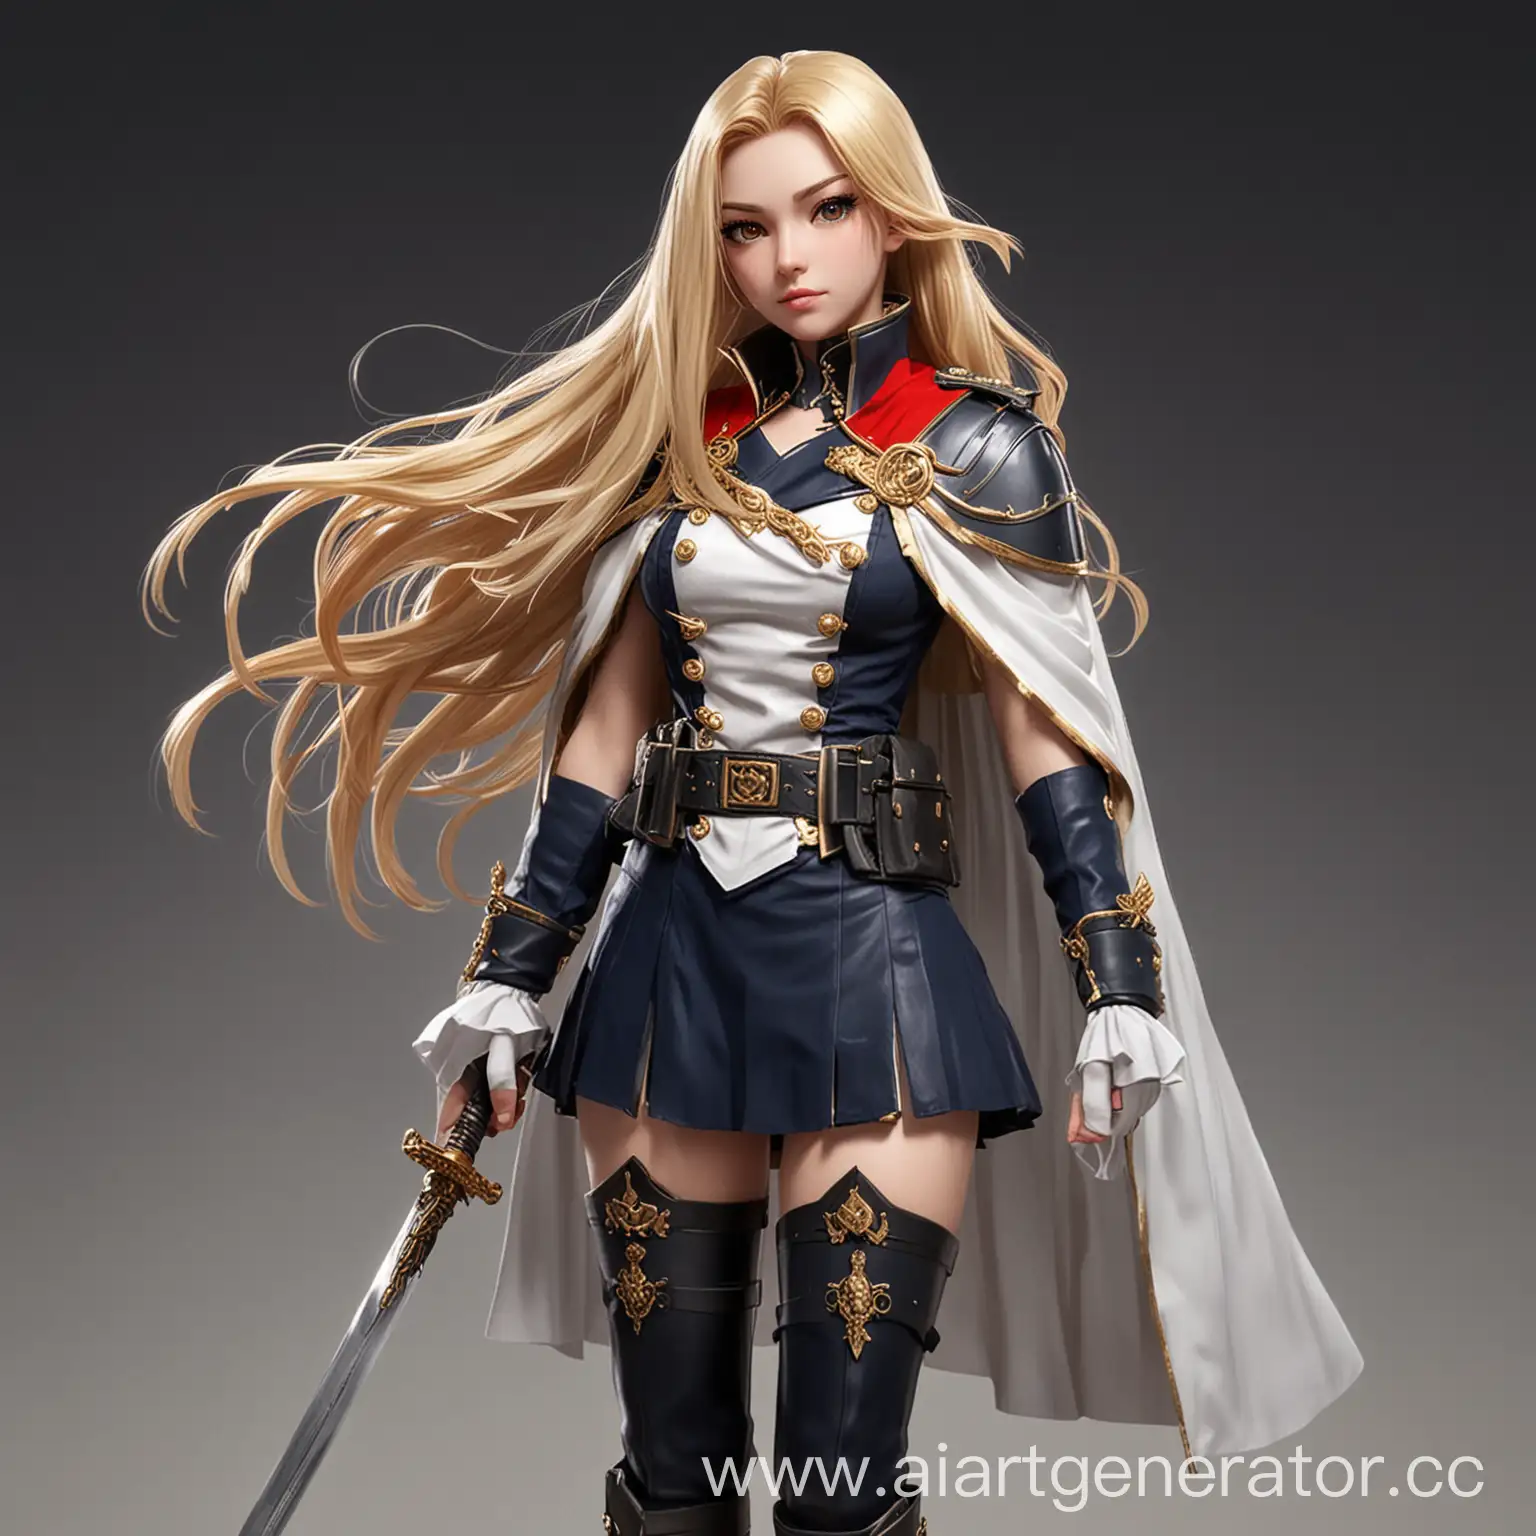 Serious-Blonde-Anime-Warrior-in-Navy-Military-Outfit-with-Sword